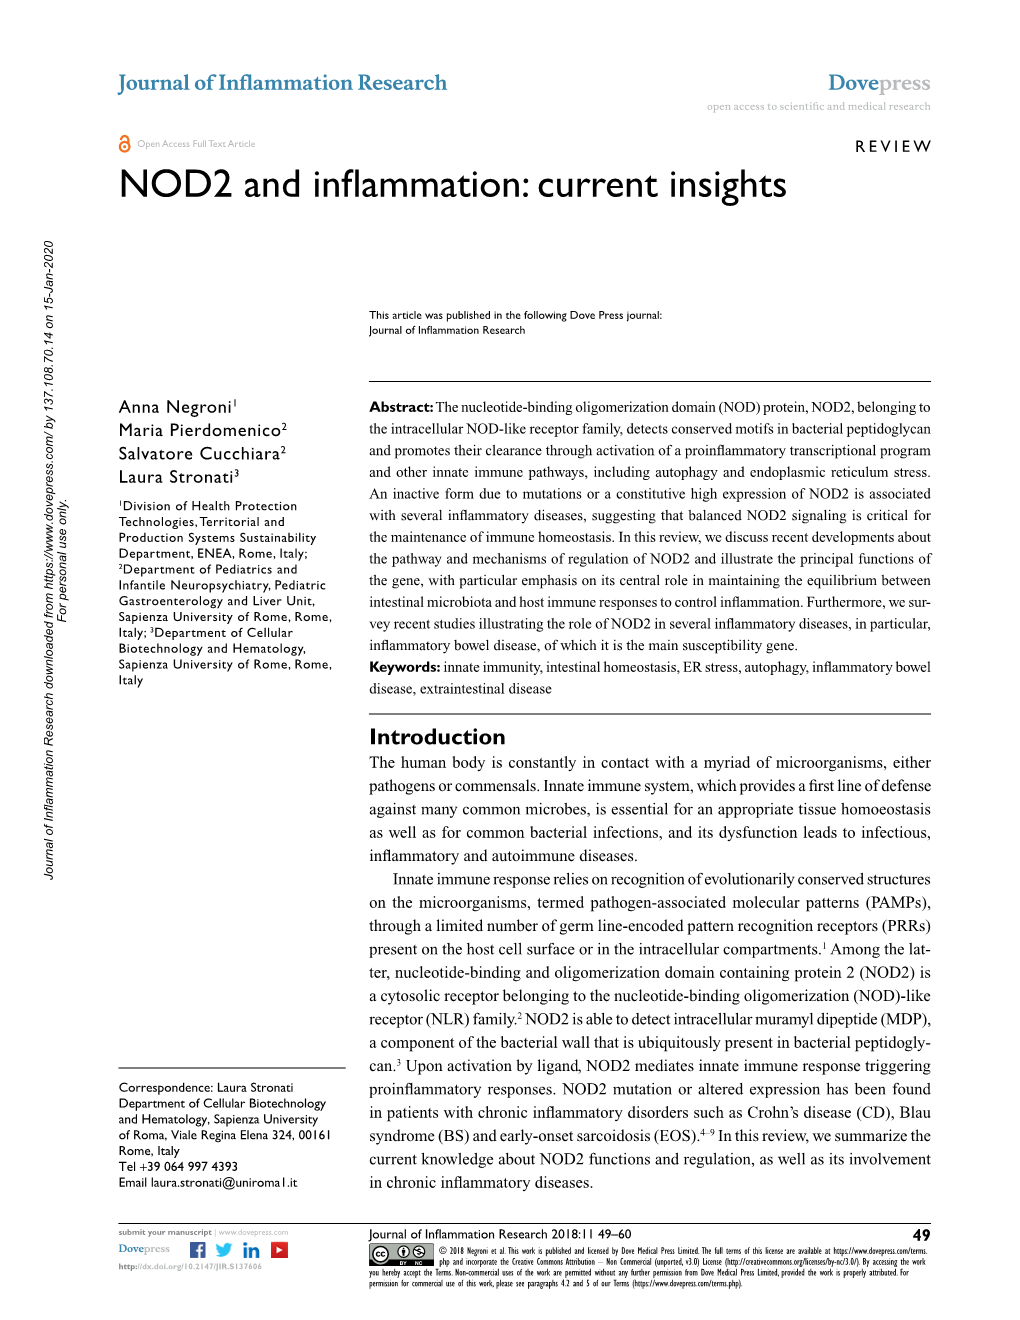 NOD2 and Inflammation: Current Insights